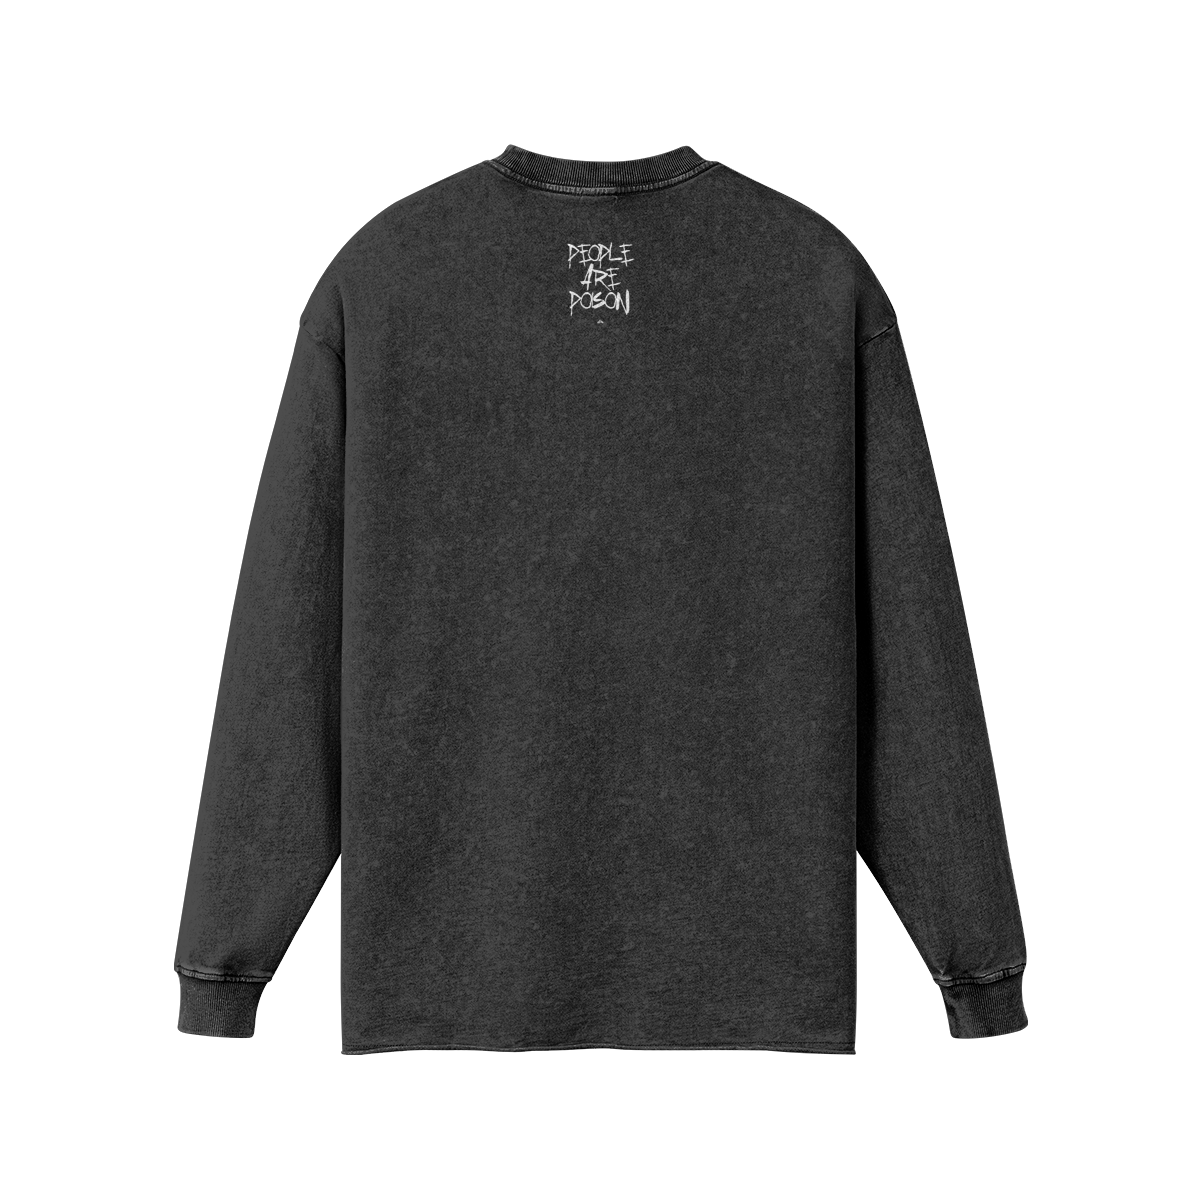 OH LORD LONG SLEEVE T-SHIRT